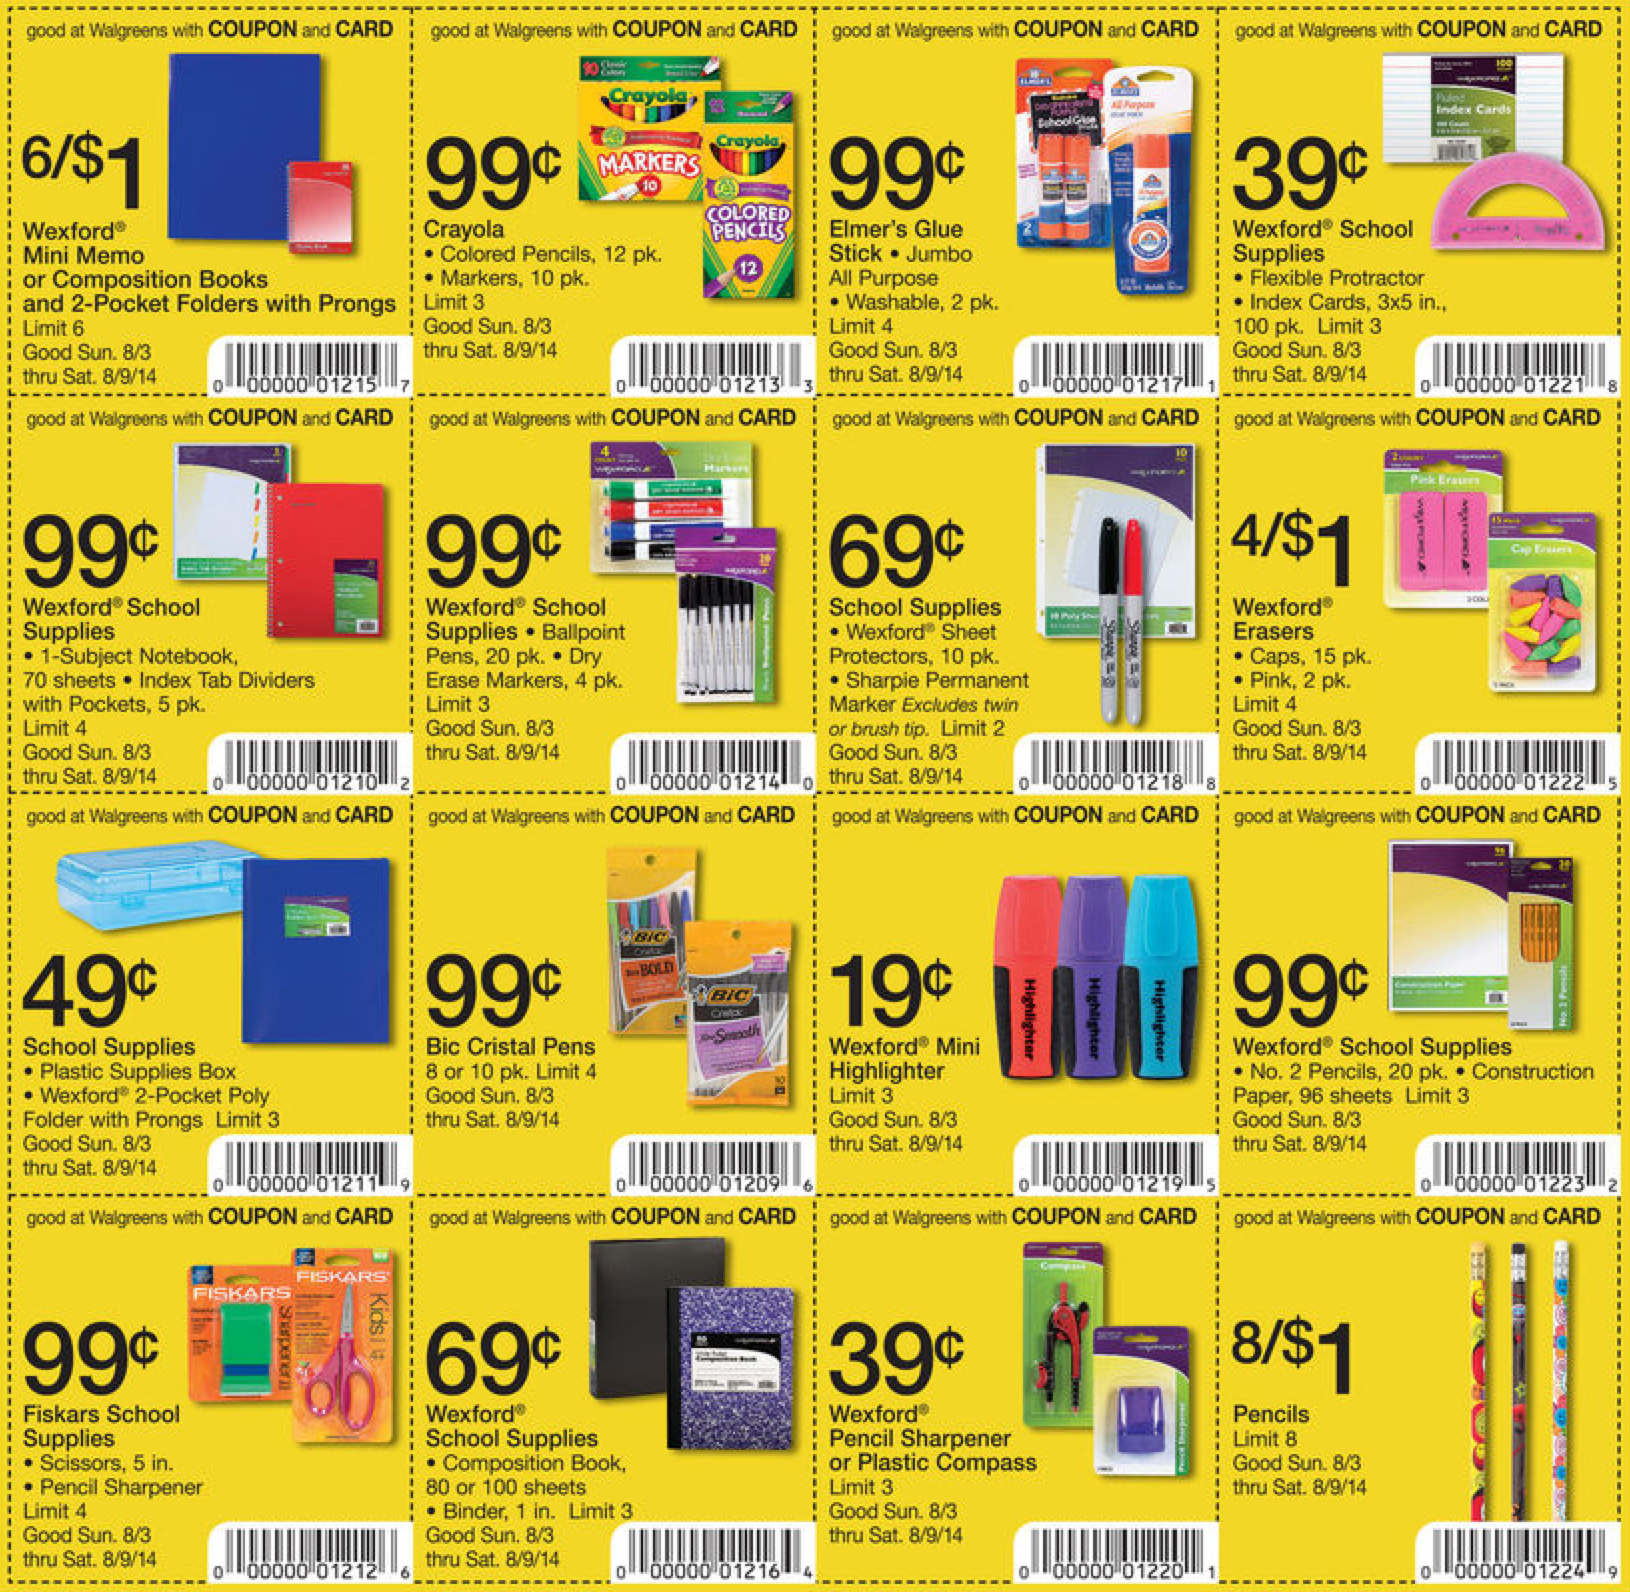 Free Printable Coupons For School Supplies 2018 - Perfume Coupons - Free Printable Coupons For School Supplies At Walmart